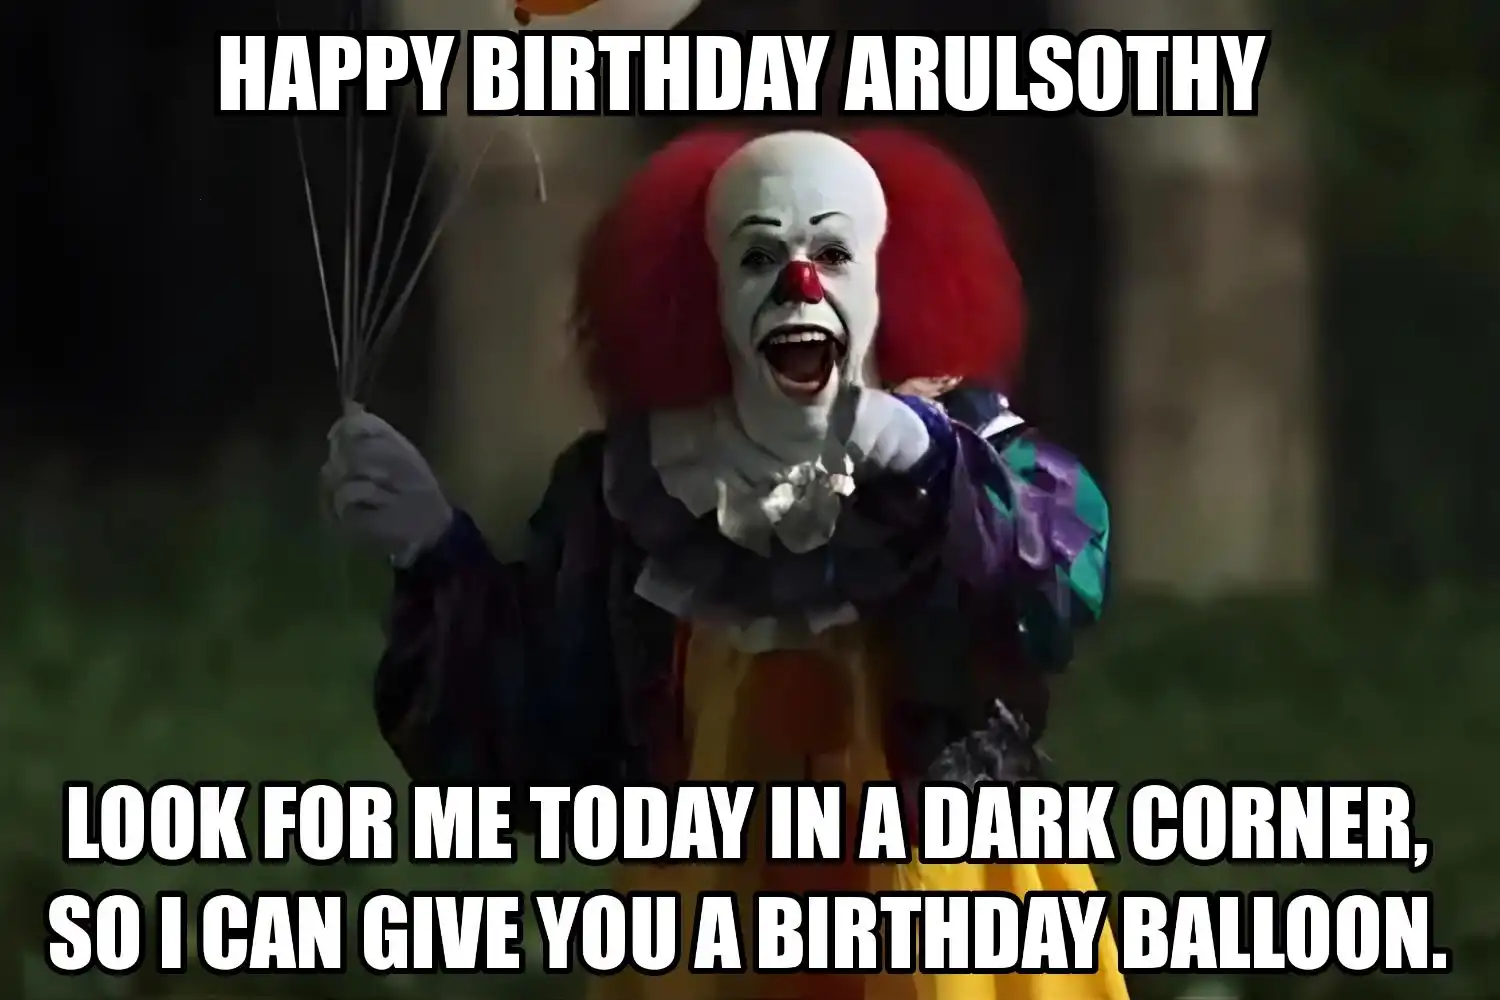 Happy Birthday Arulsothy I Can Give You A Balloon Meme